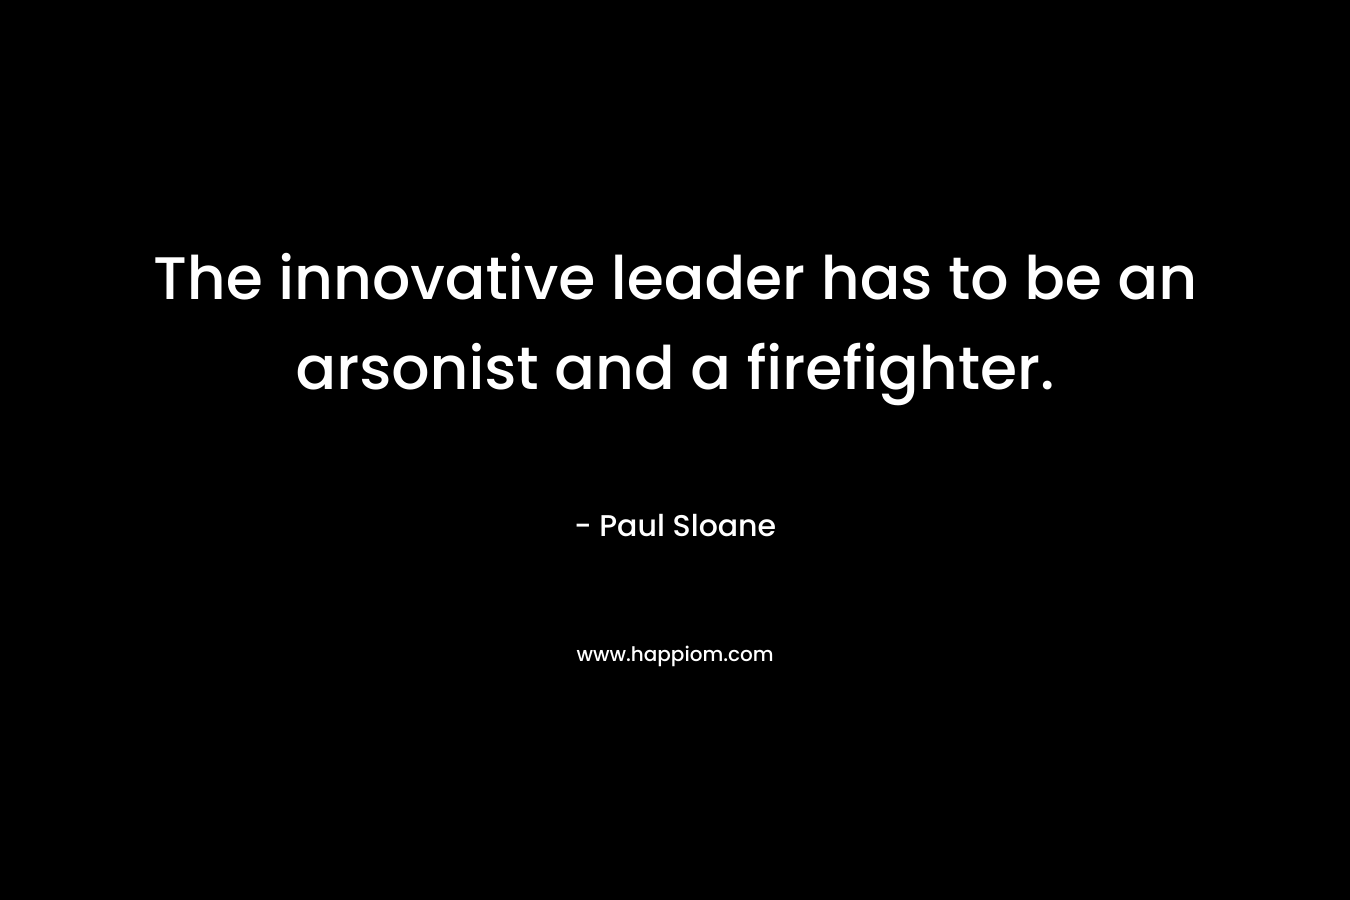 The innovative leader has to be an arsonist and a firefighter. – Paul Sloane